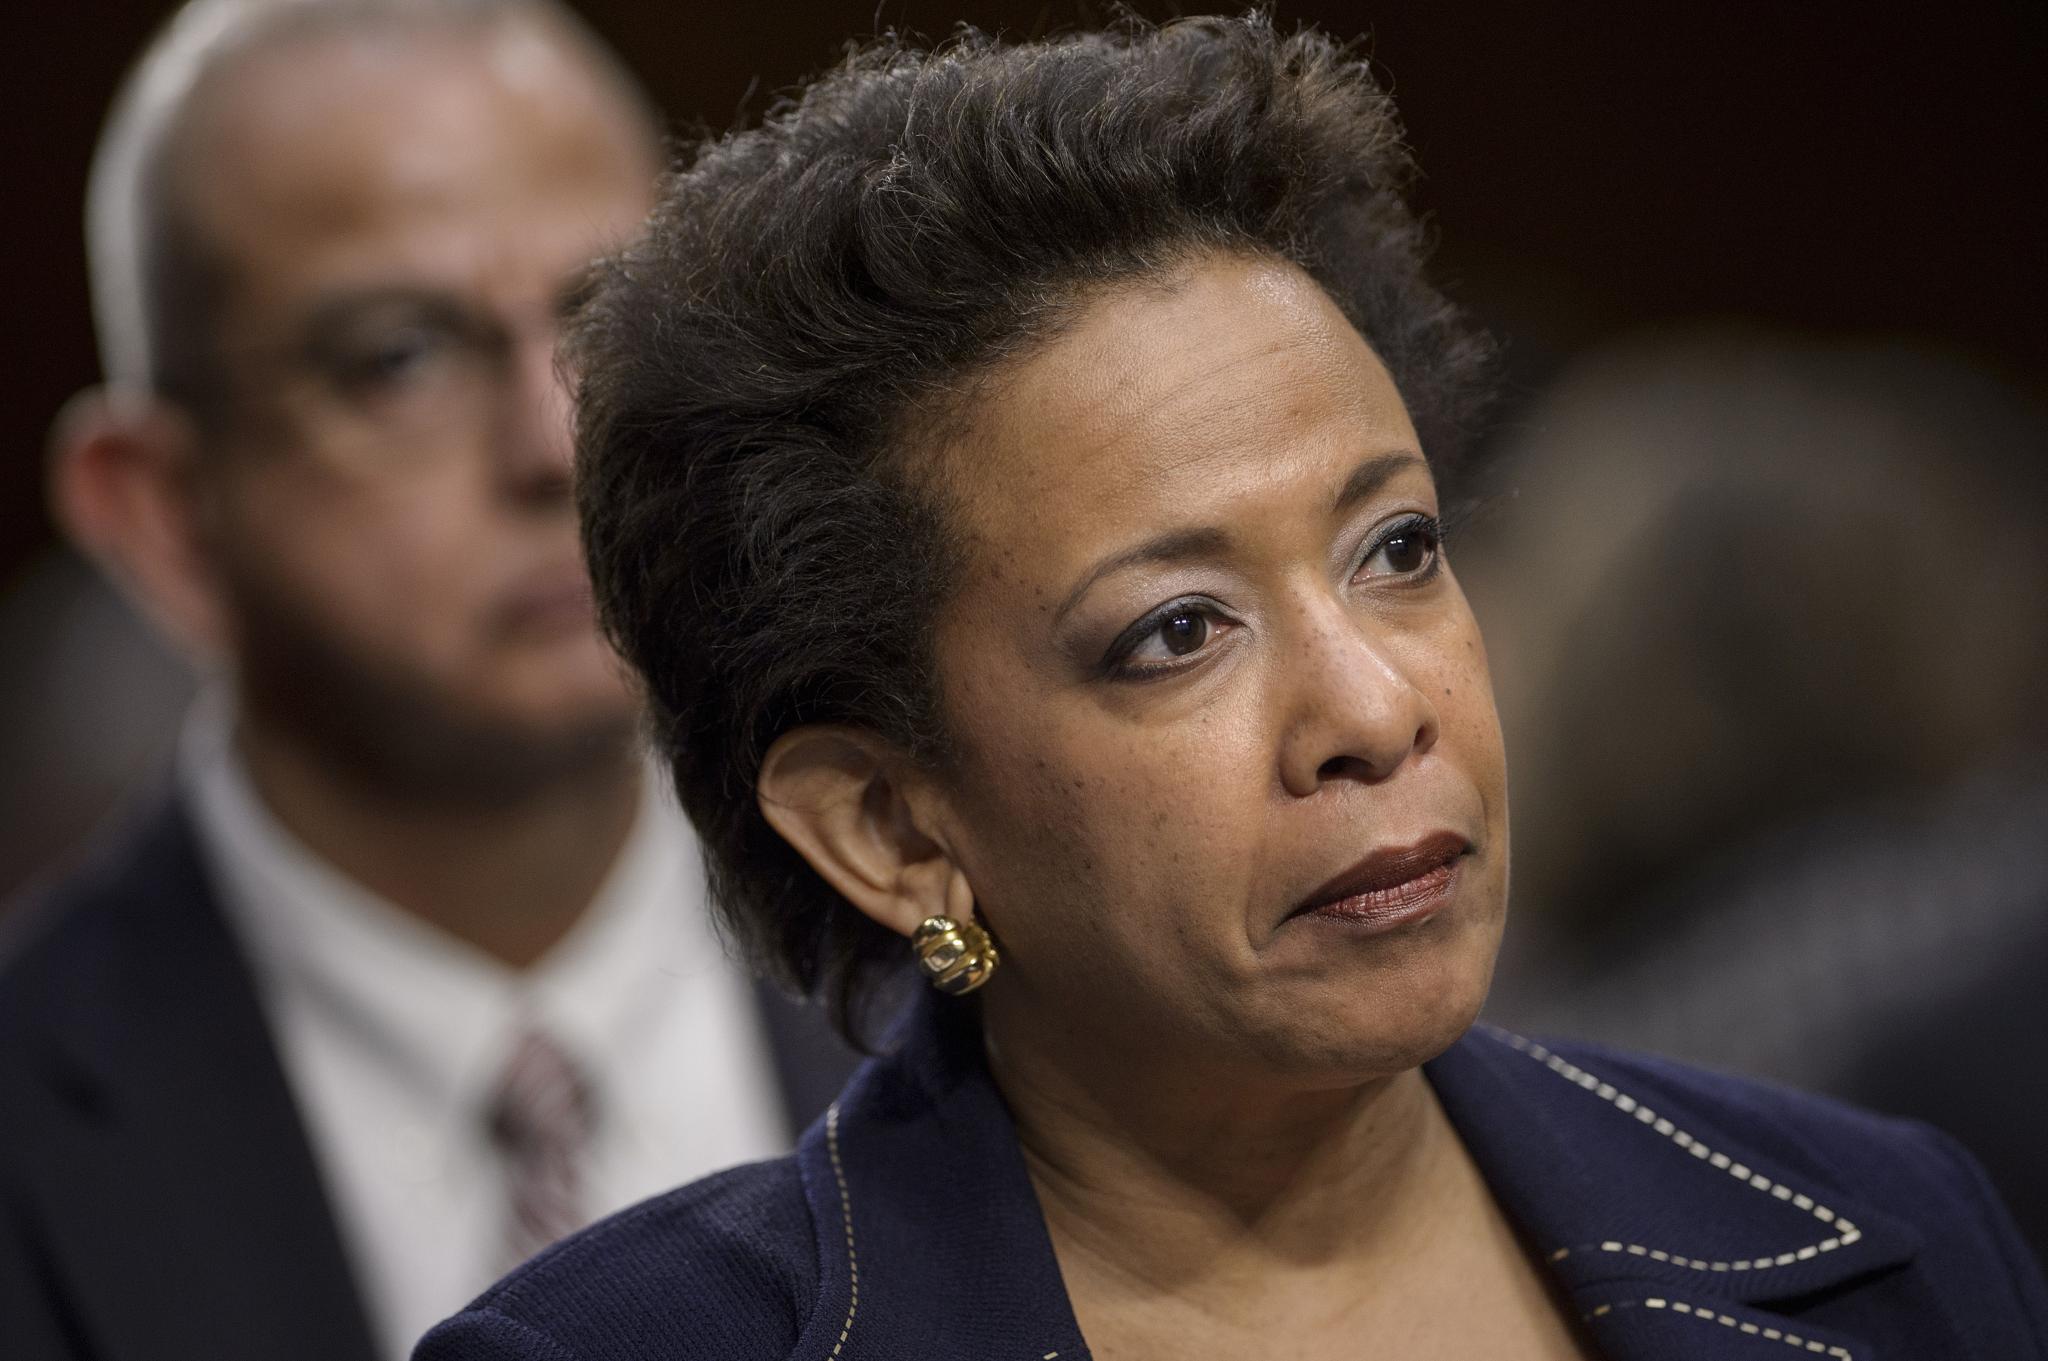 Loretta Lynch to Travel to Baltimore to Speak With Community Leaders